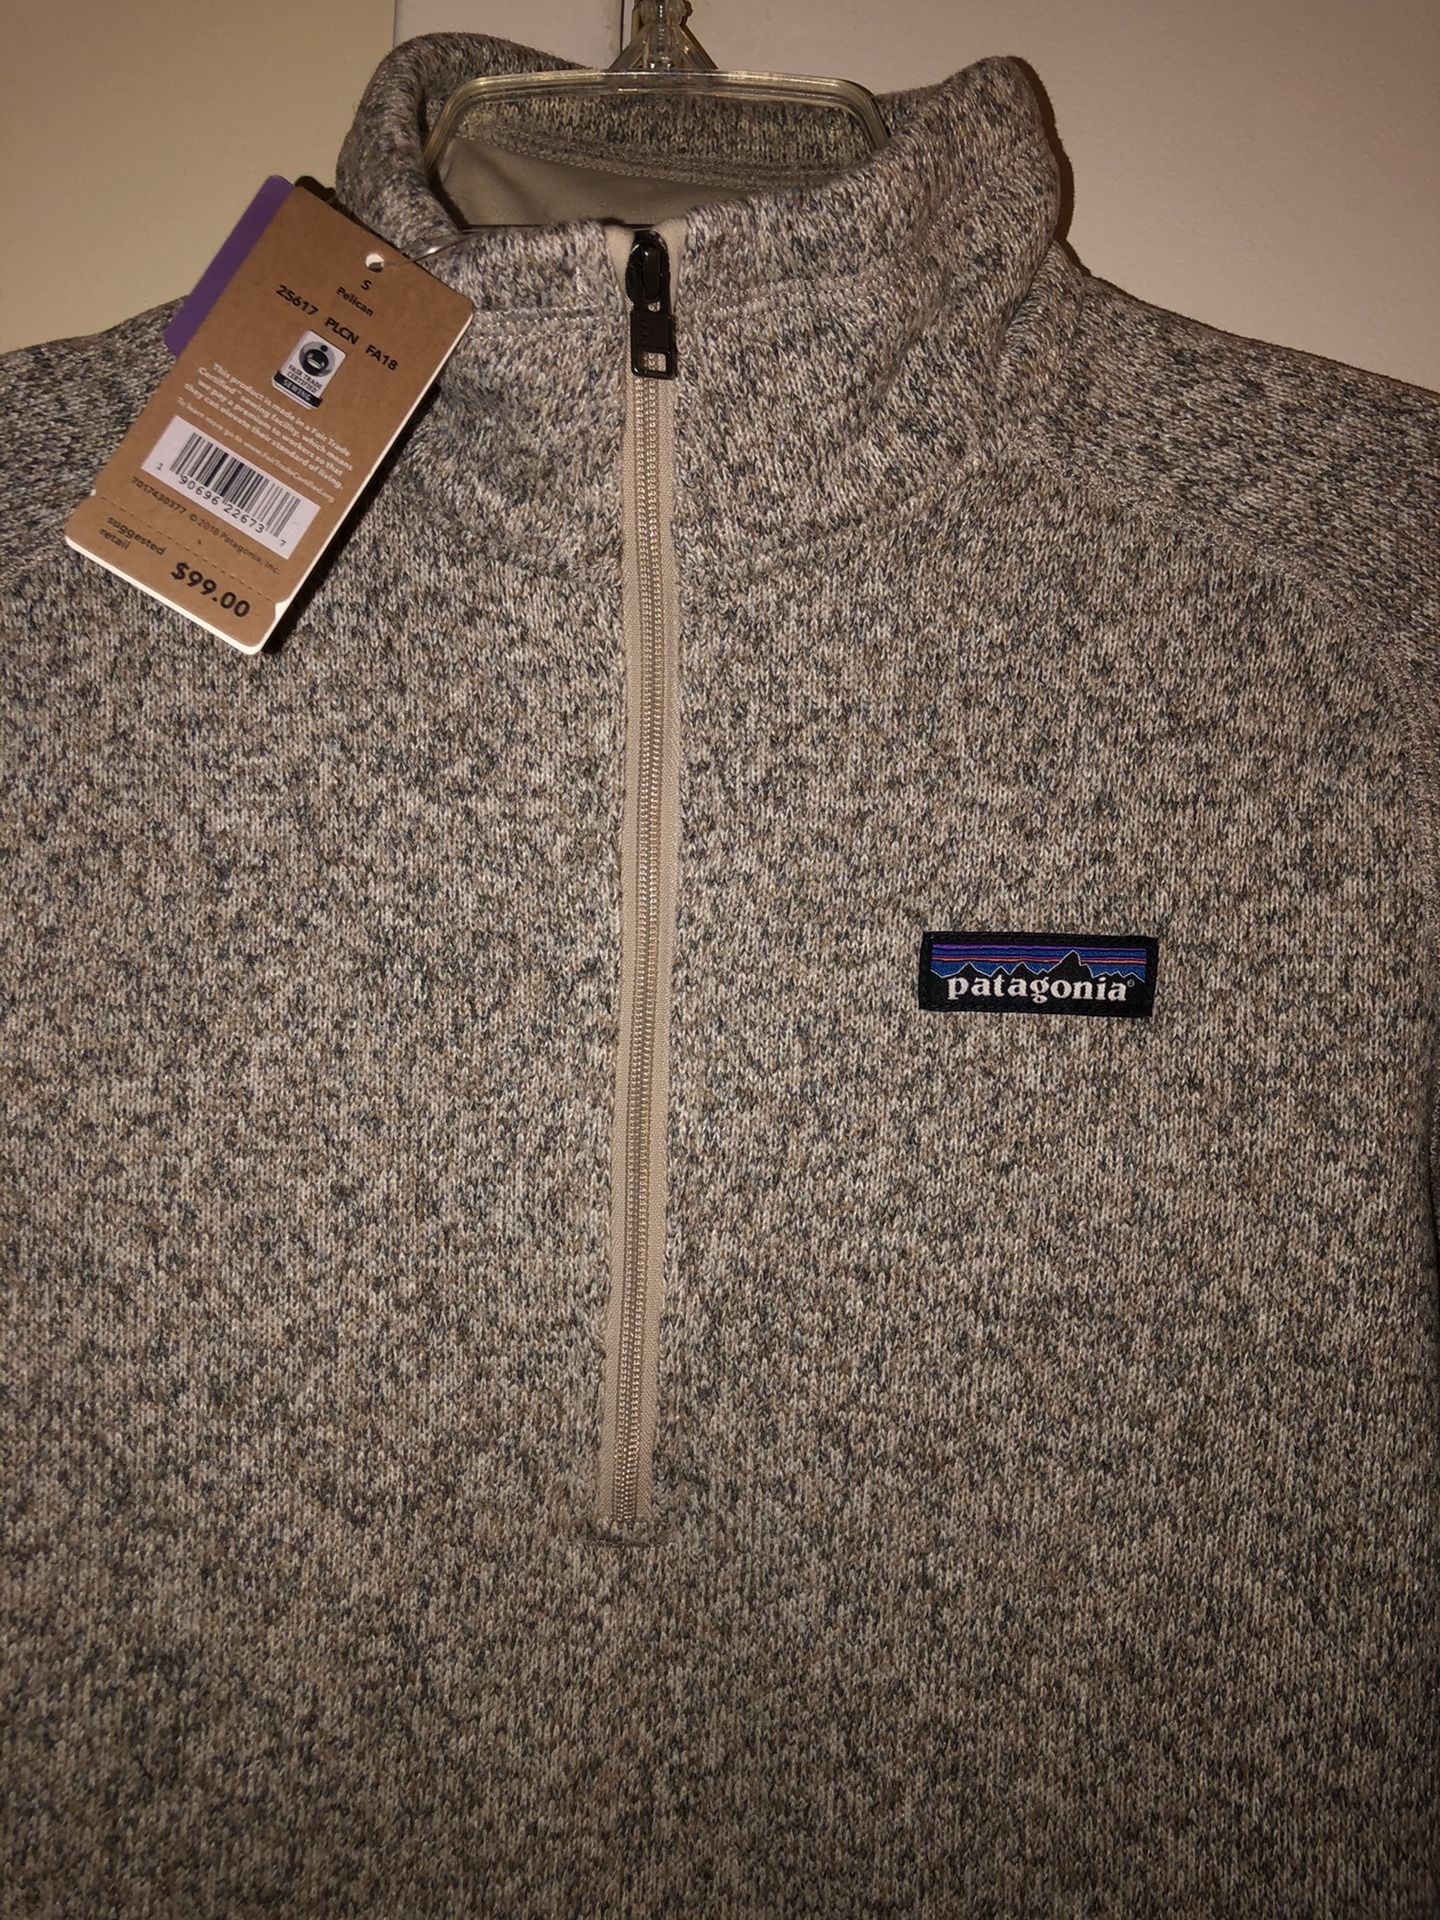 Authentic Patagonia (color- pelican) Women’s Better Sweater 1/4 zip slim fit size small. Brand new, never worn.